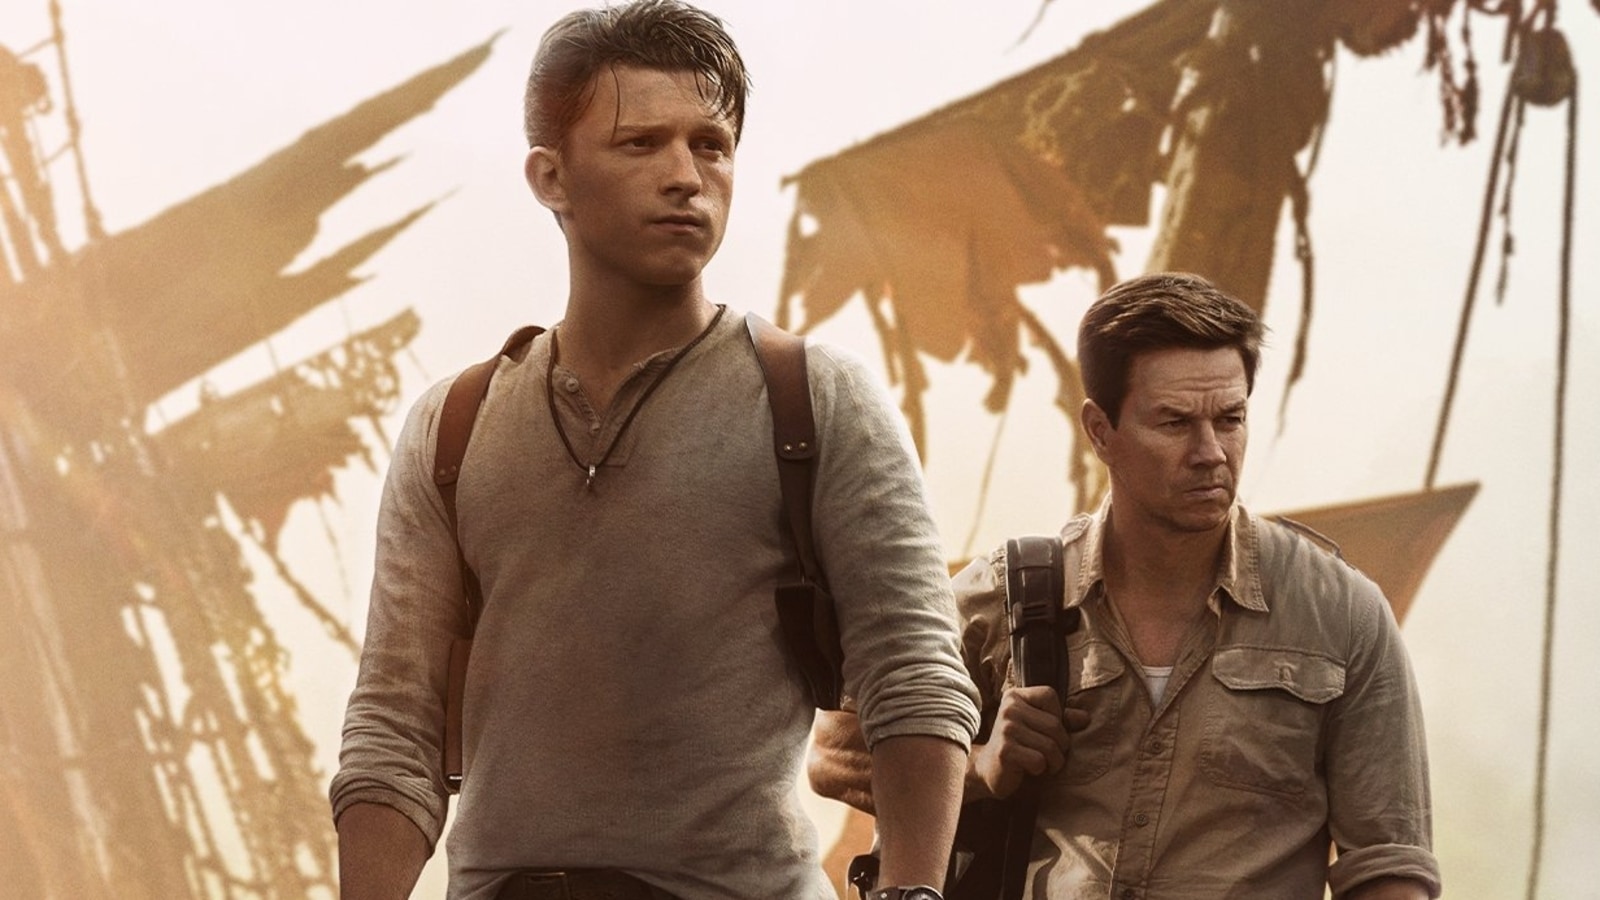 Strong Moral Themes Make UNCHARTED a Box Office Success